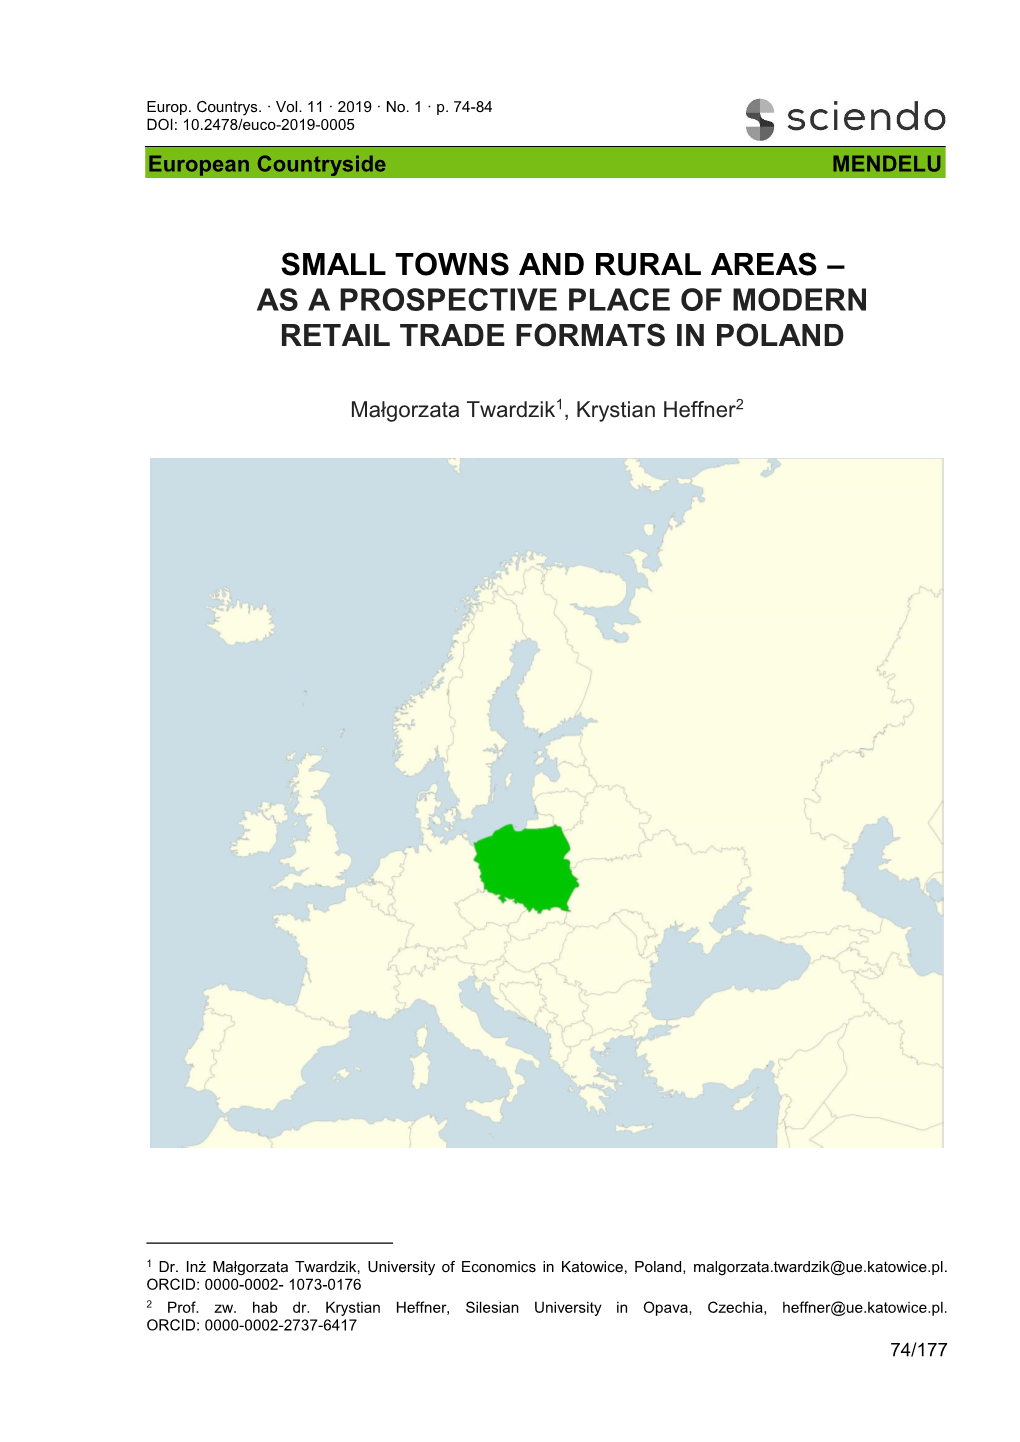 Small Towns and Rural Areas – As a Prospective Place of Modern Retail Trade Formats in Poland